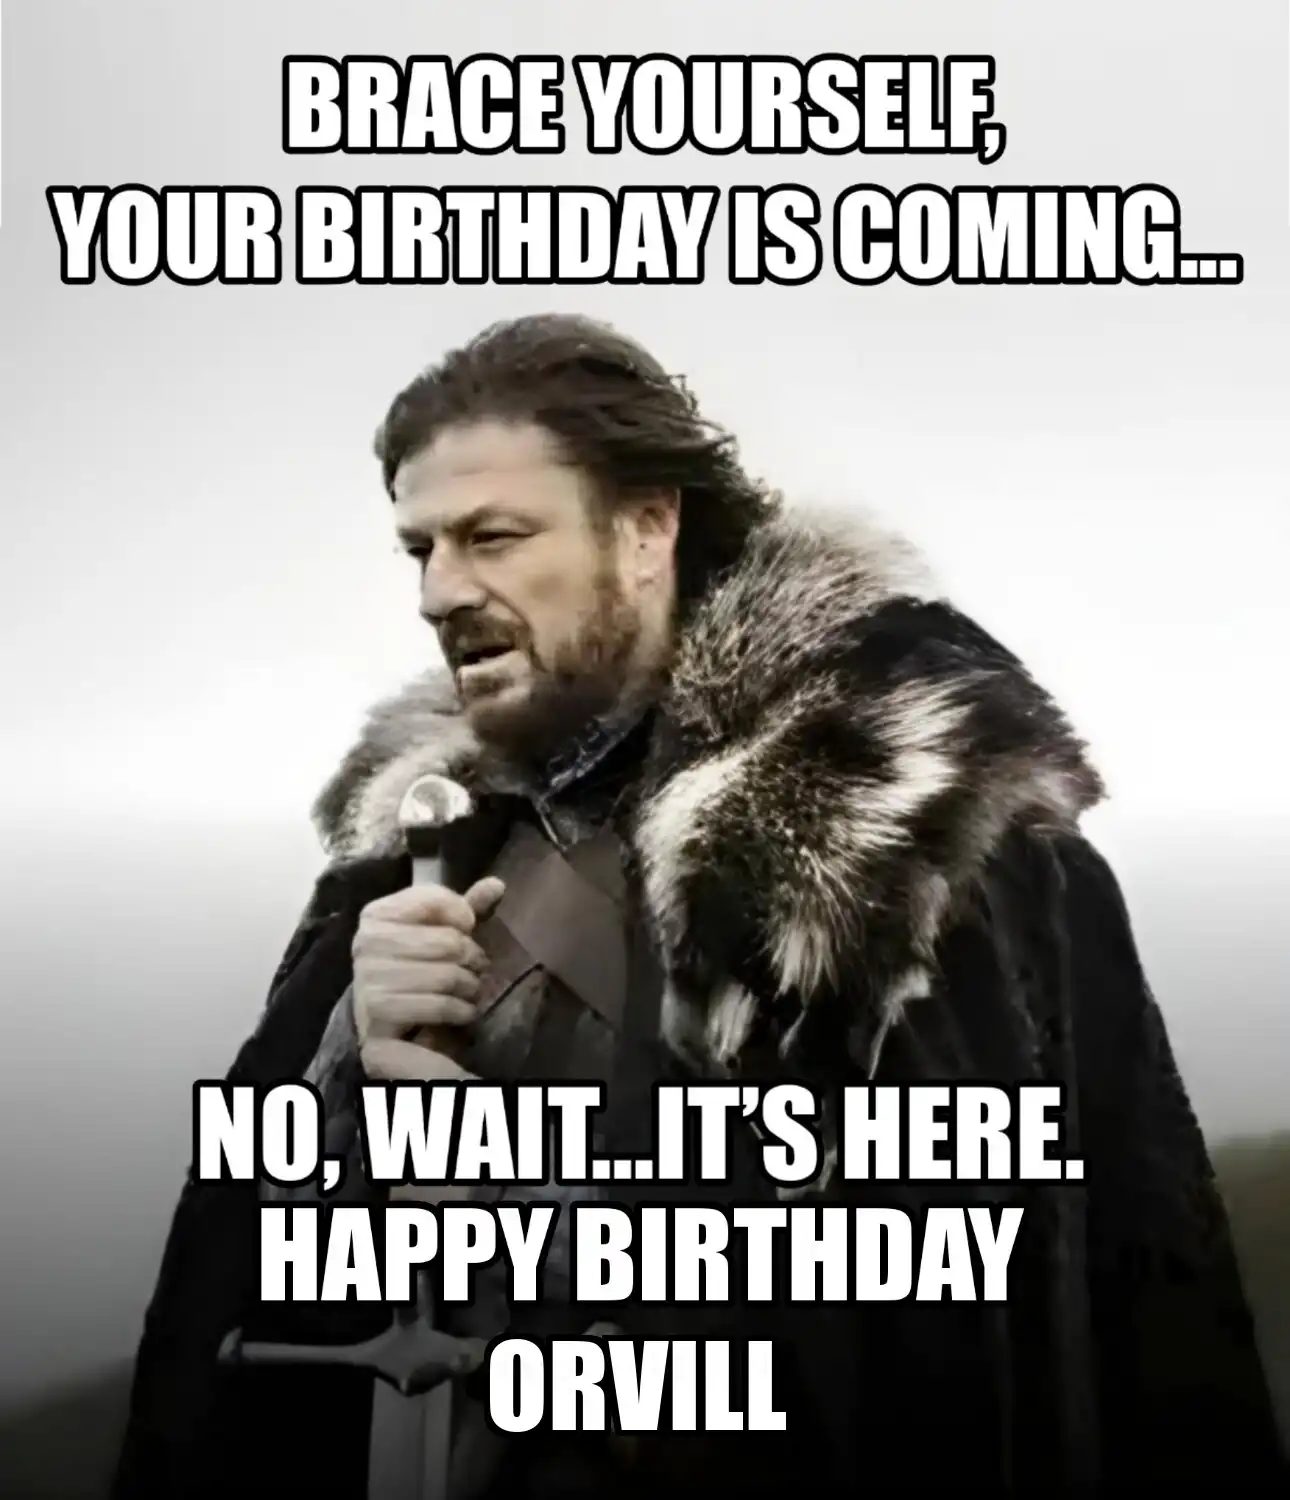 Happy Birthday Orvill Brace Yourself Your Birthday Is Coming Meme